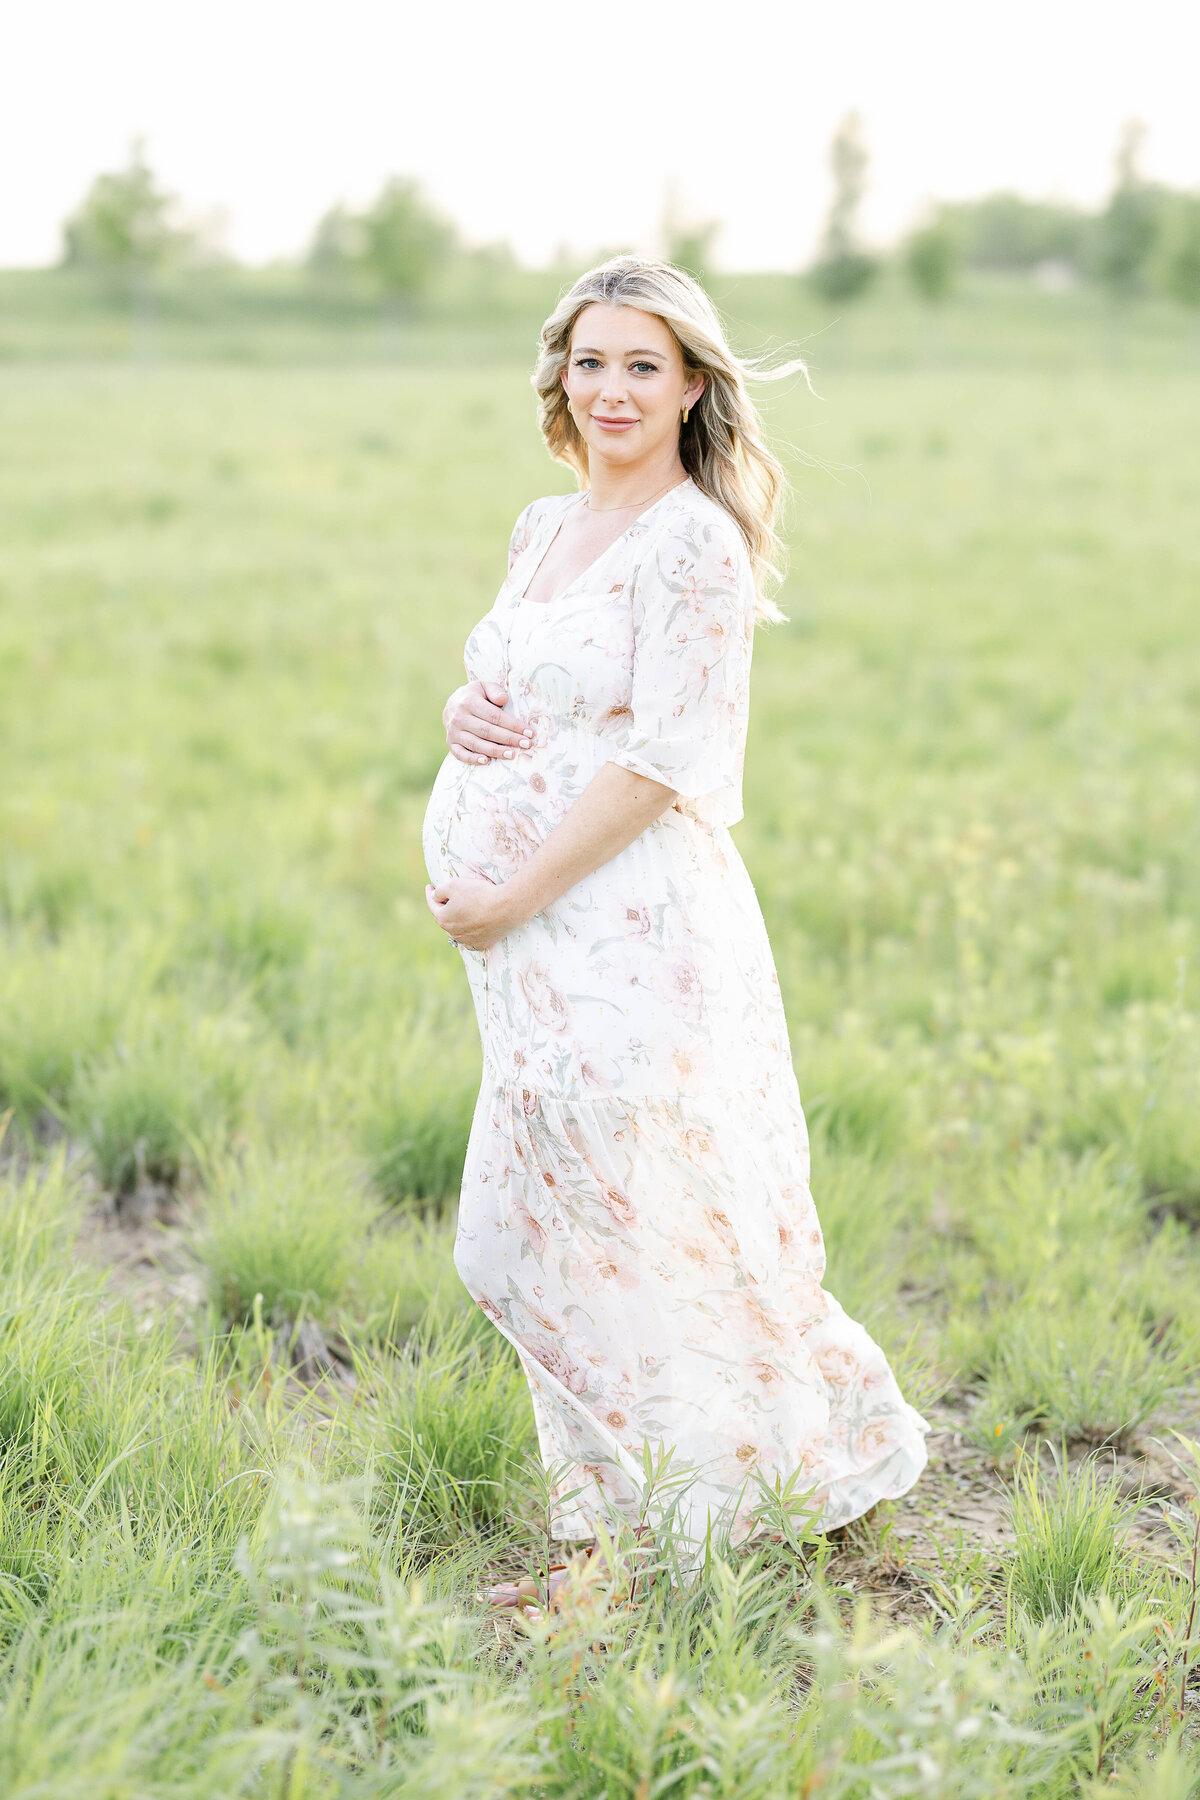 Outdoor maternity portrait of woman in a long dress